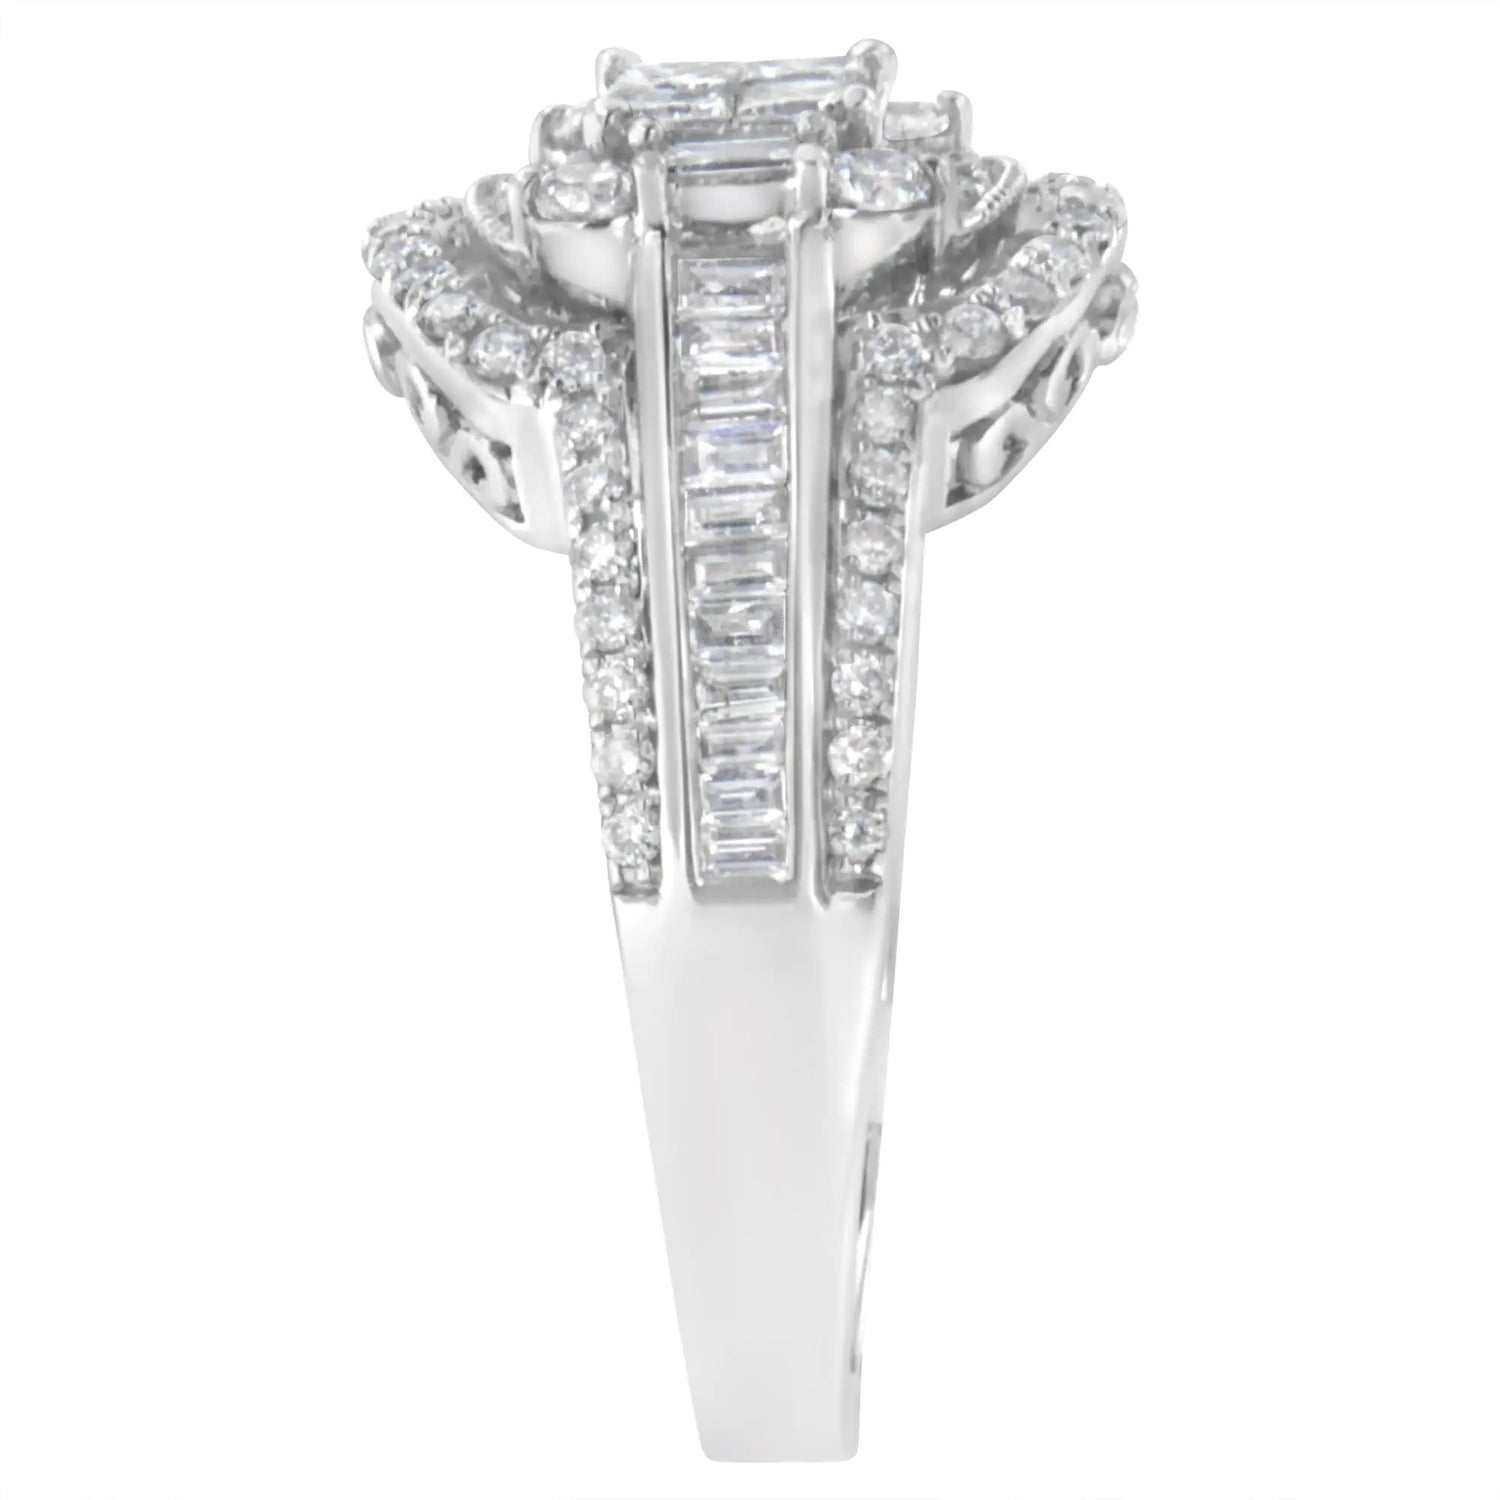 14KT White Gold Diamond Cocktail Ring (1 1/4 cttw, H-I Color, SI2-I1 Clarity)